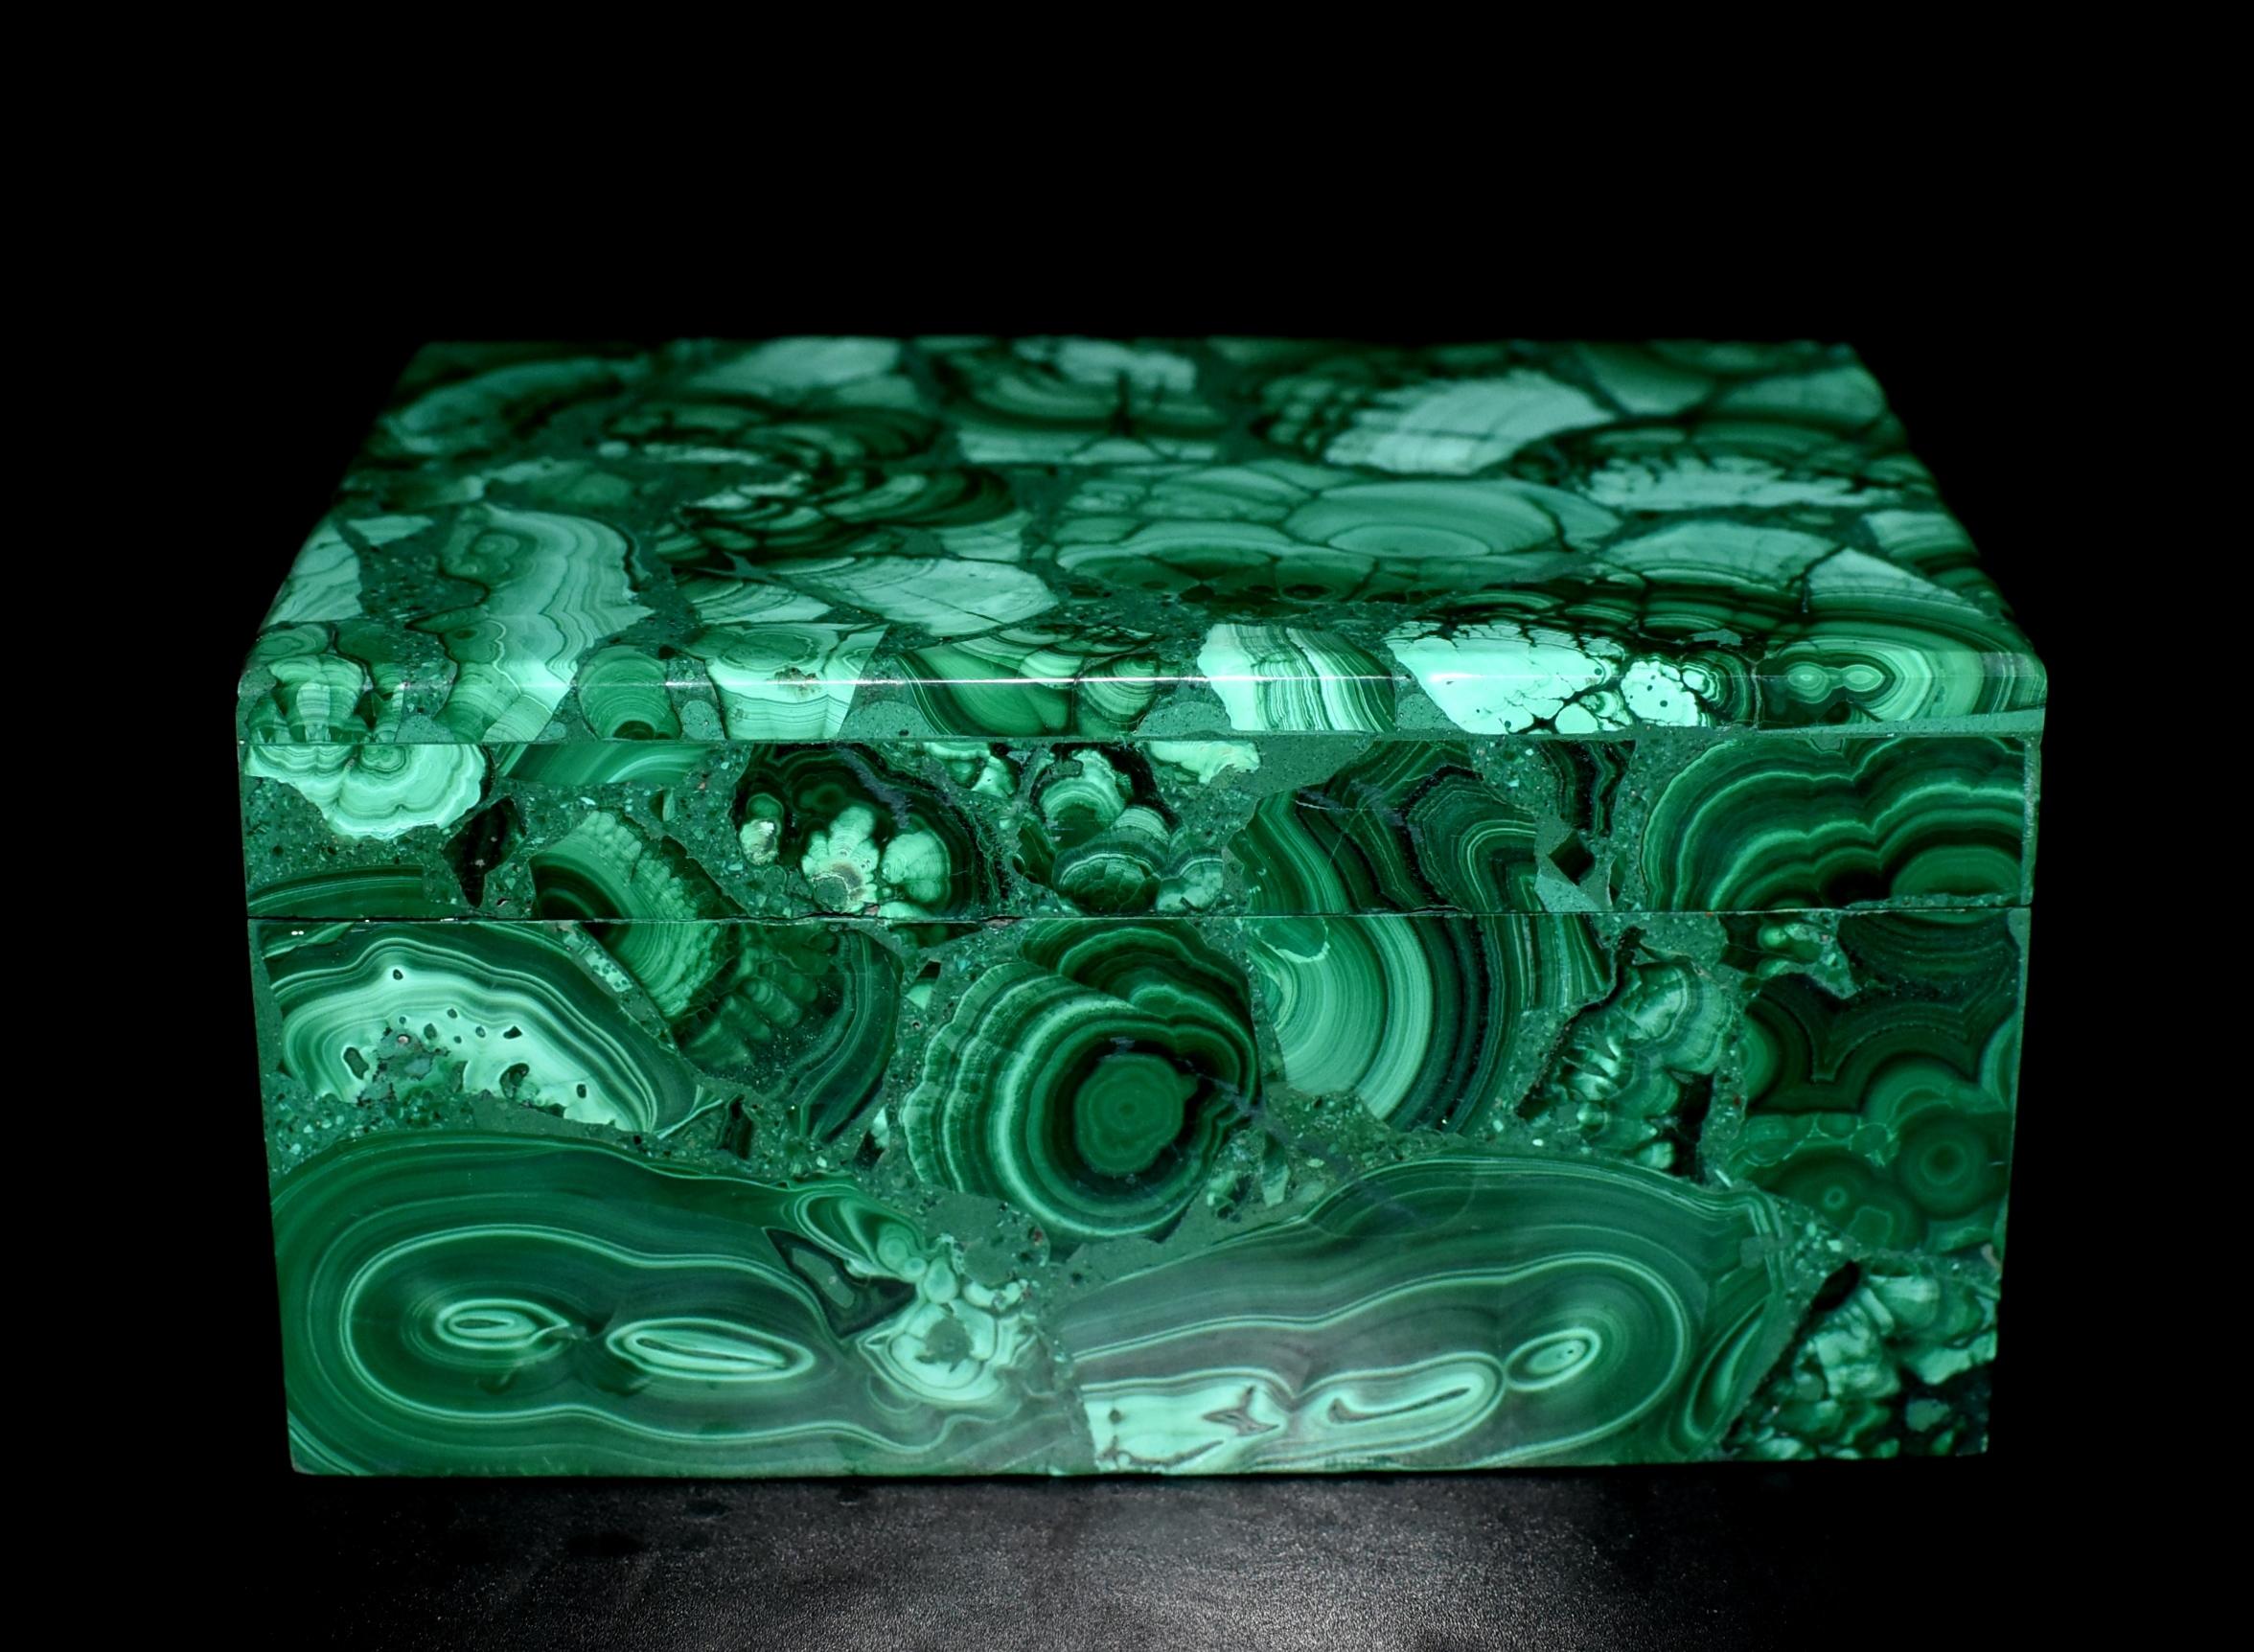 A large, full slab, spectacular 3 lb all natural malachite box for any purpose. Splendid swirls and patterns, this remarkable pieces adds a luxurious and sophisticated touch to your home. Malachite is a stone of transformation, helping one achieve